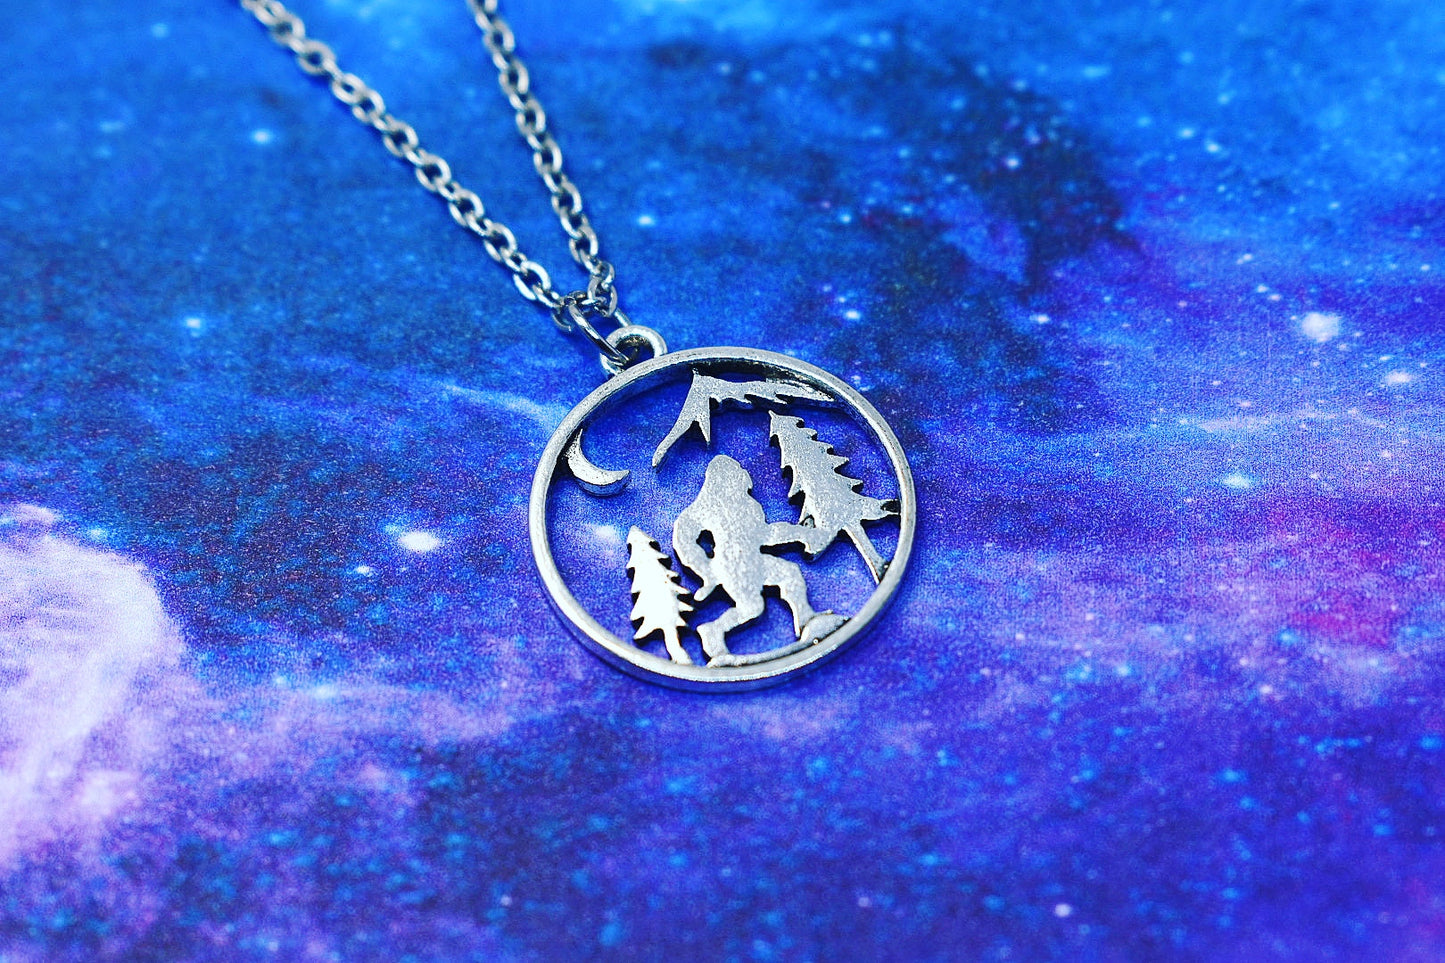 Snowman Necklace with Pine Tree, Crescent Moon, & Mountain - Stainless Steel Chain